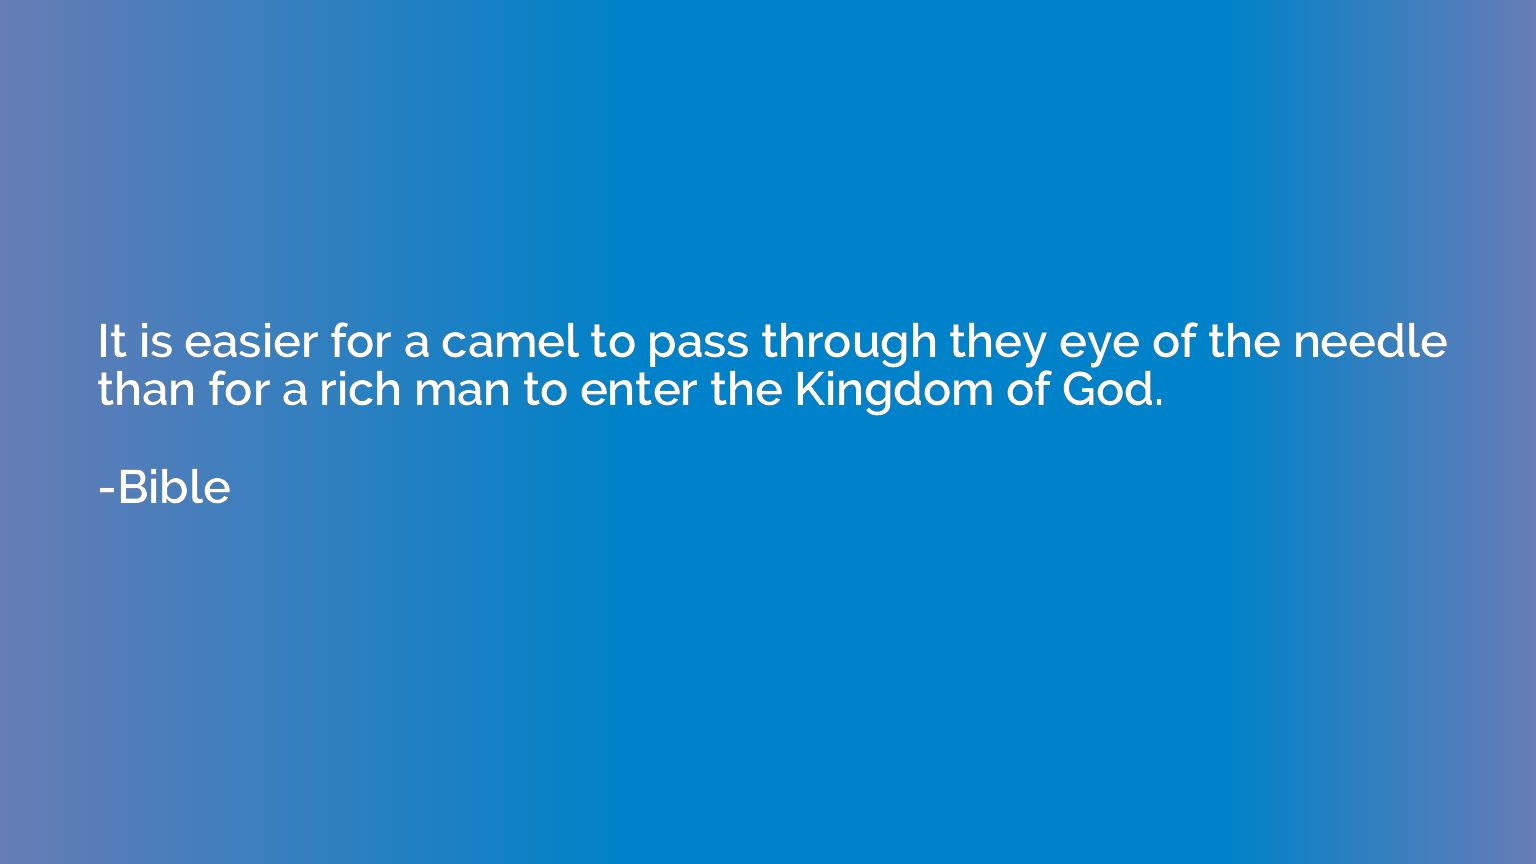 It is easier for a camel to pass through they eye of the nee